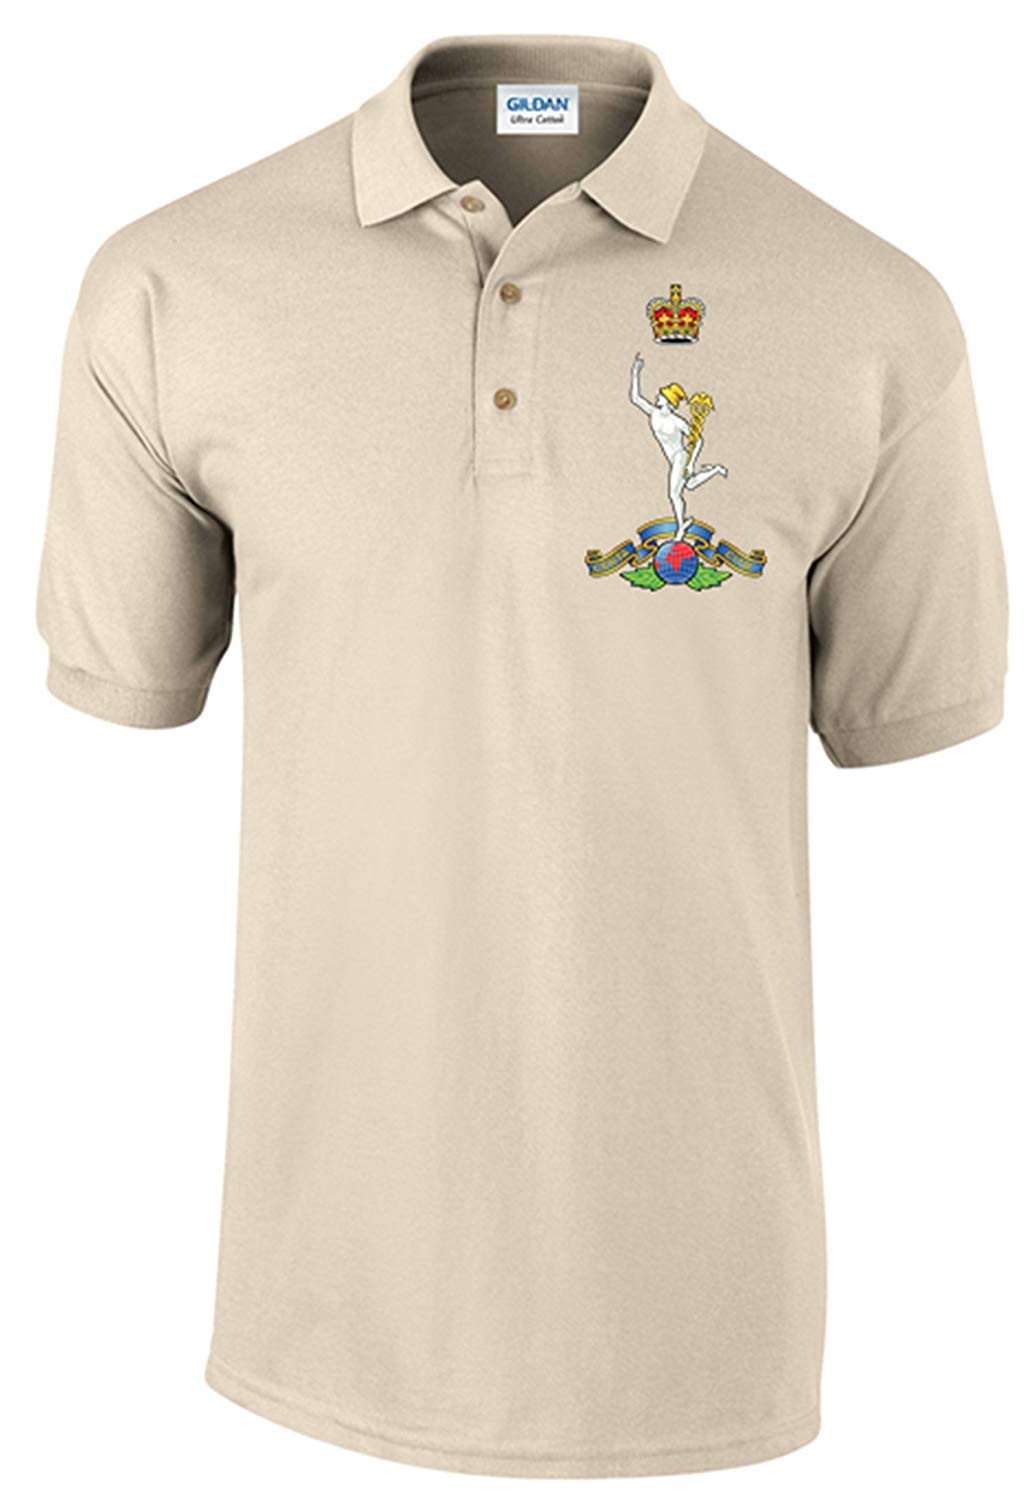 Royal Signals Polo Shirt - Army 1157 kit Sand / L Army 1157 Kit Veterans Owned Business